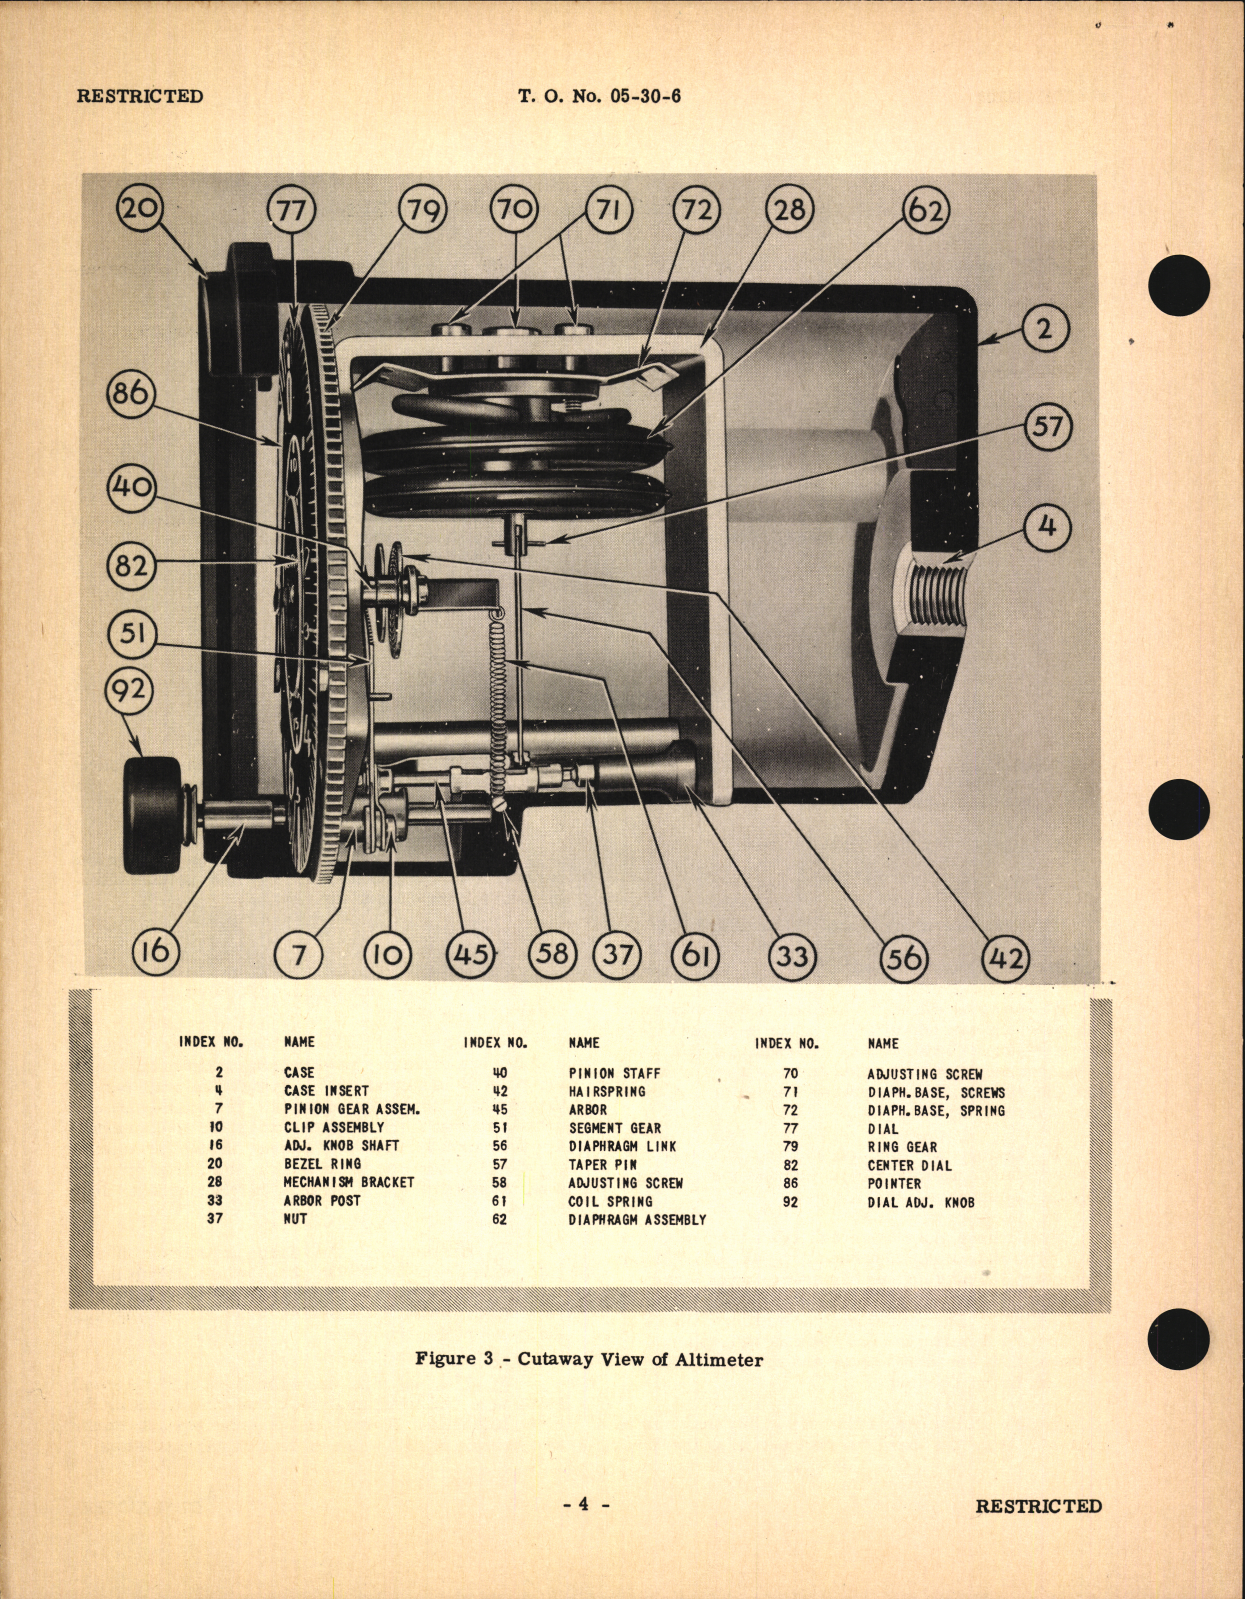 Sample page 8 from AirCorps Library document: Handbook of Instructions with Parts Catalog for Type B-12 Altimeter